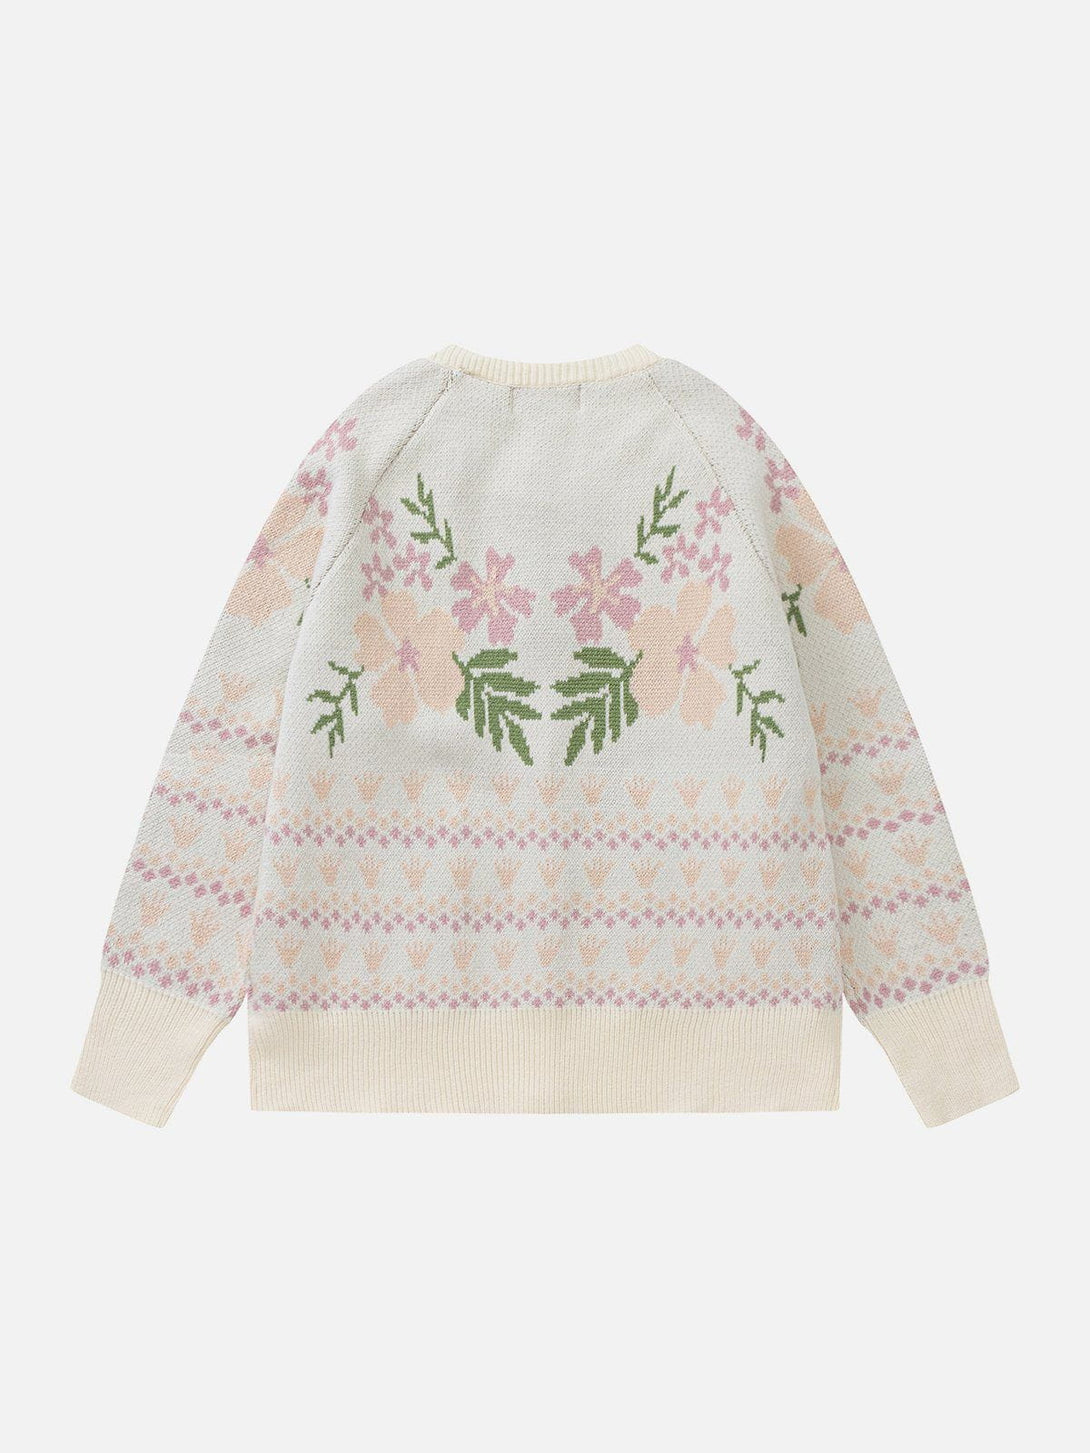 Levefly - Embroidery Patchwork Cardigan - Streetwear Fashion - levefly.com